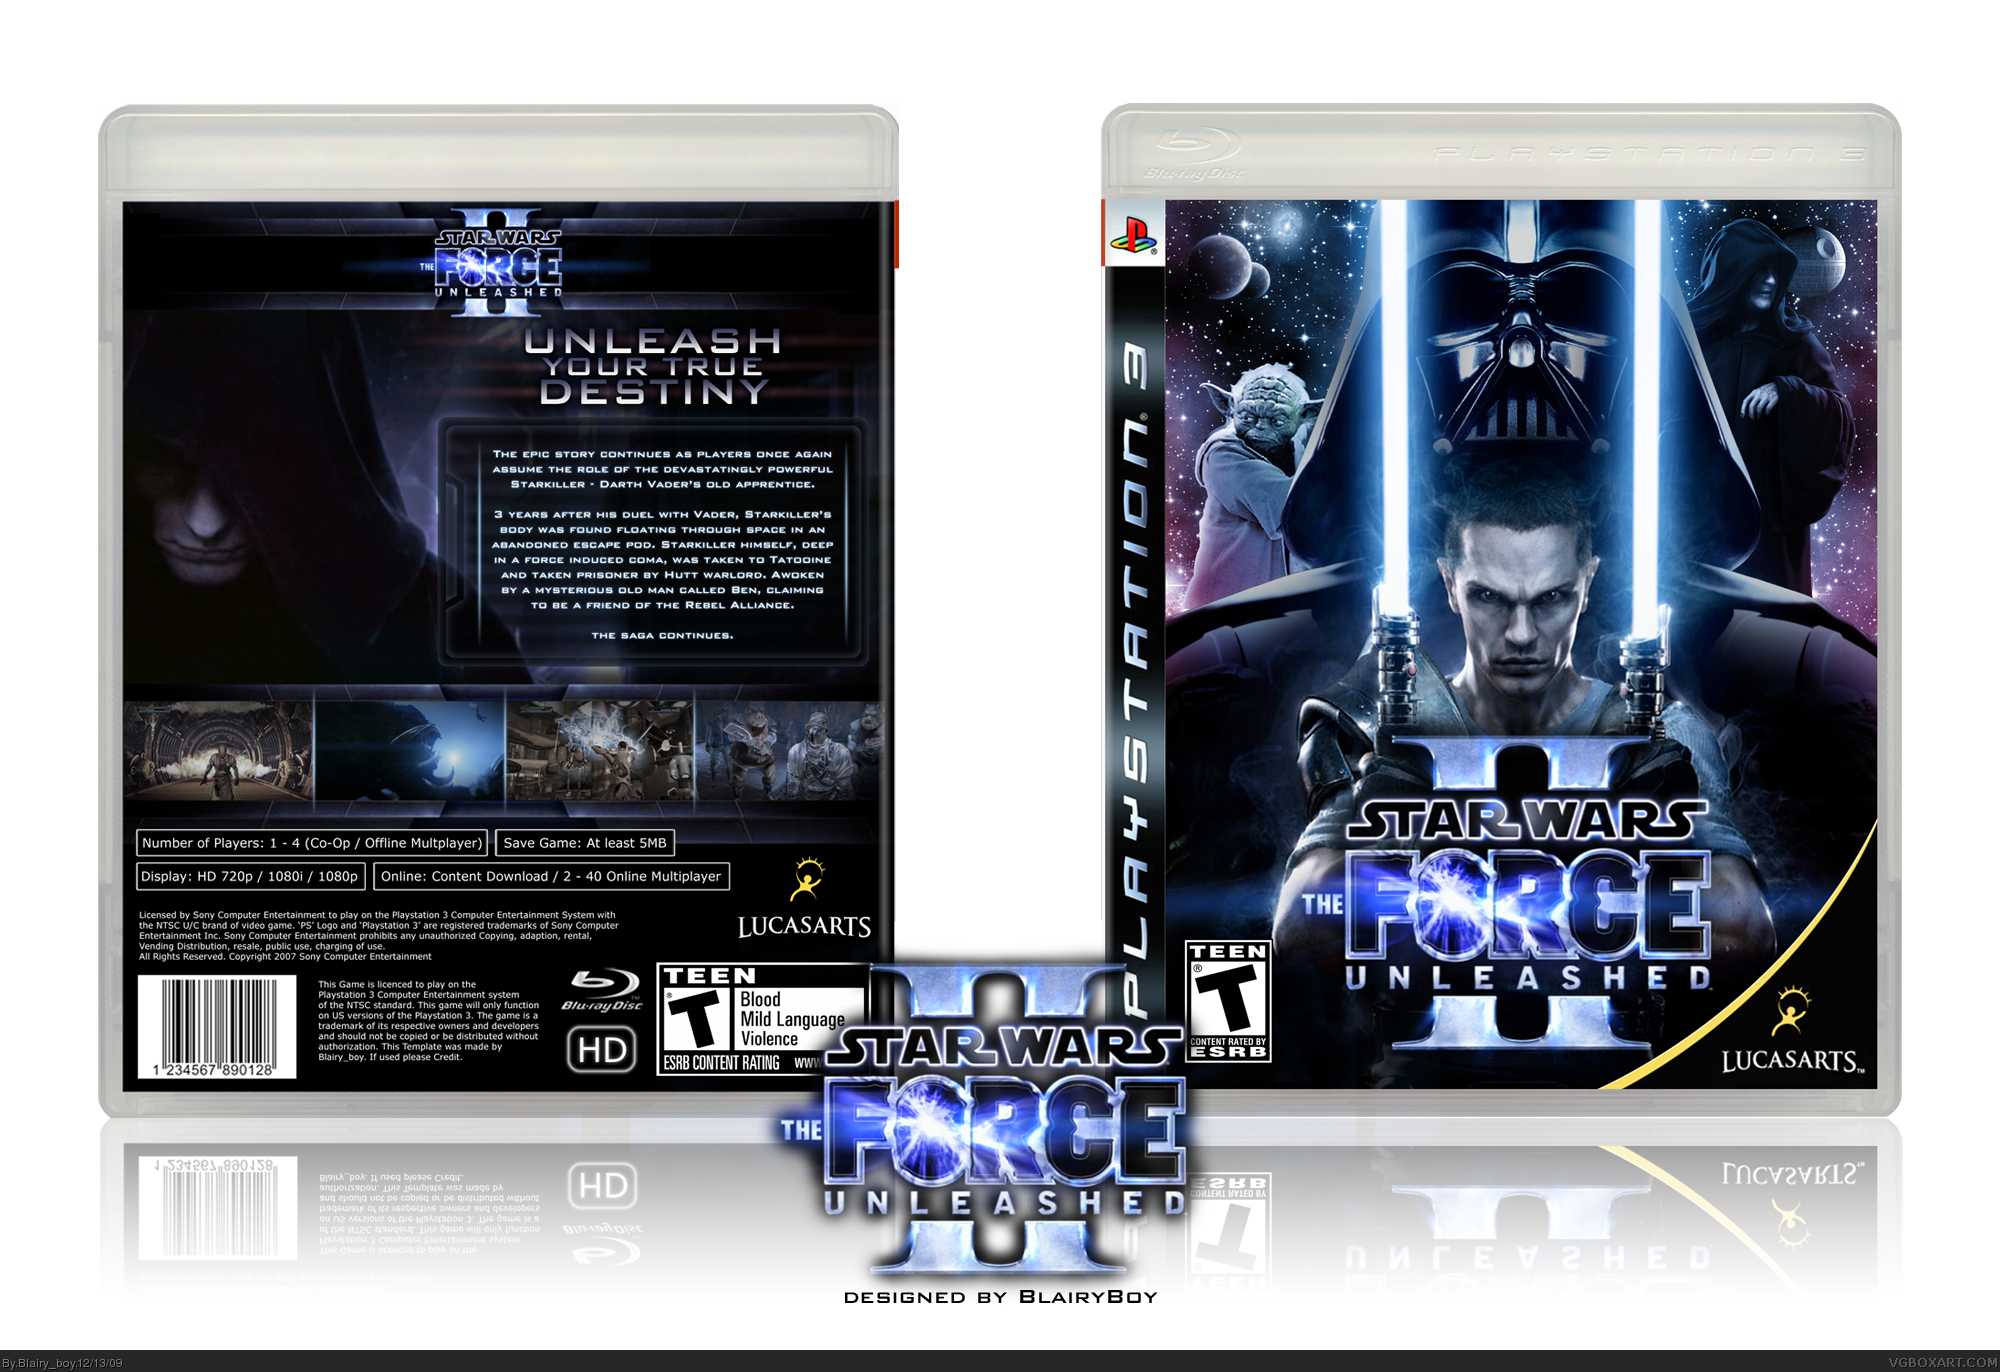 Star Wars Force ps2. Star Wars: the Force unleashed II (ps3). Force unleashed 2 ps3. PLAYSTATION 2 the Force unleashed.